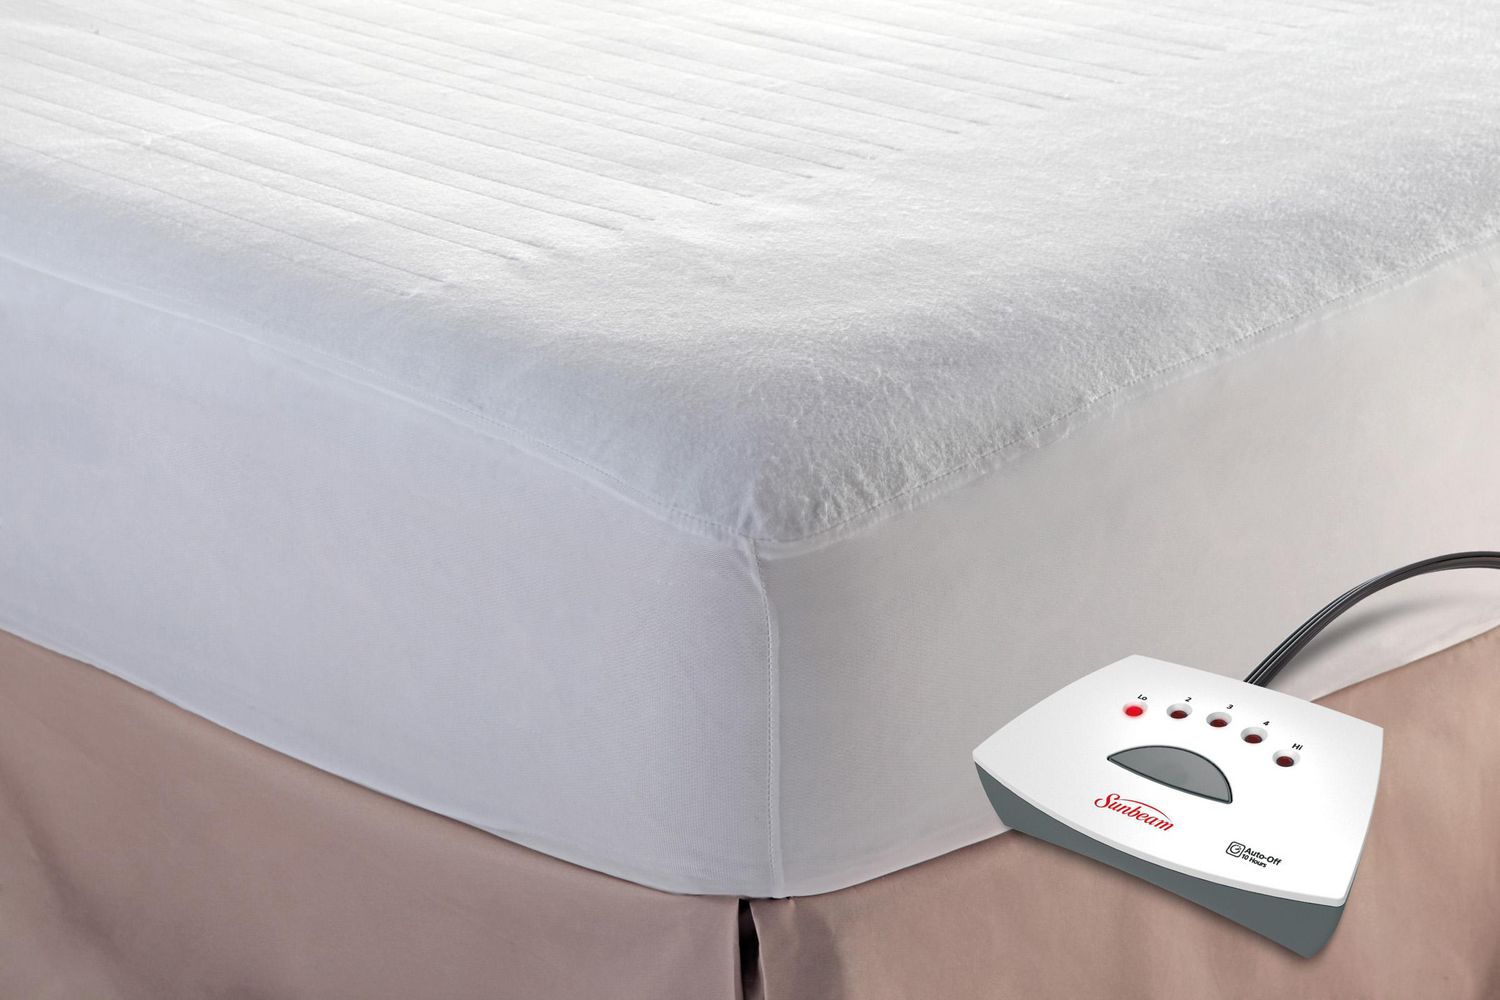 sunbeam therapedic heated and quilted mattress pad